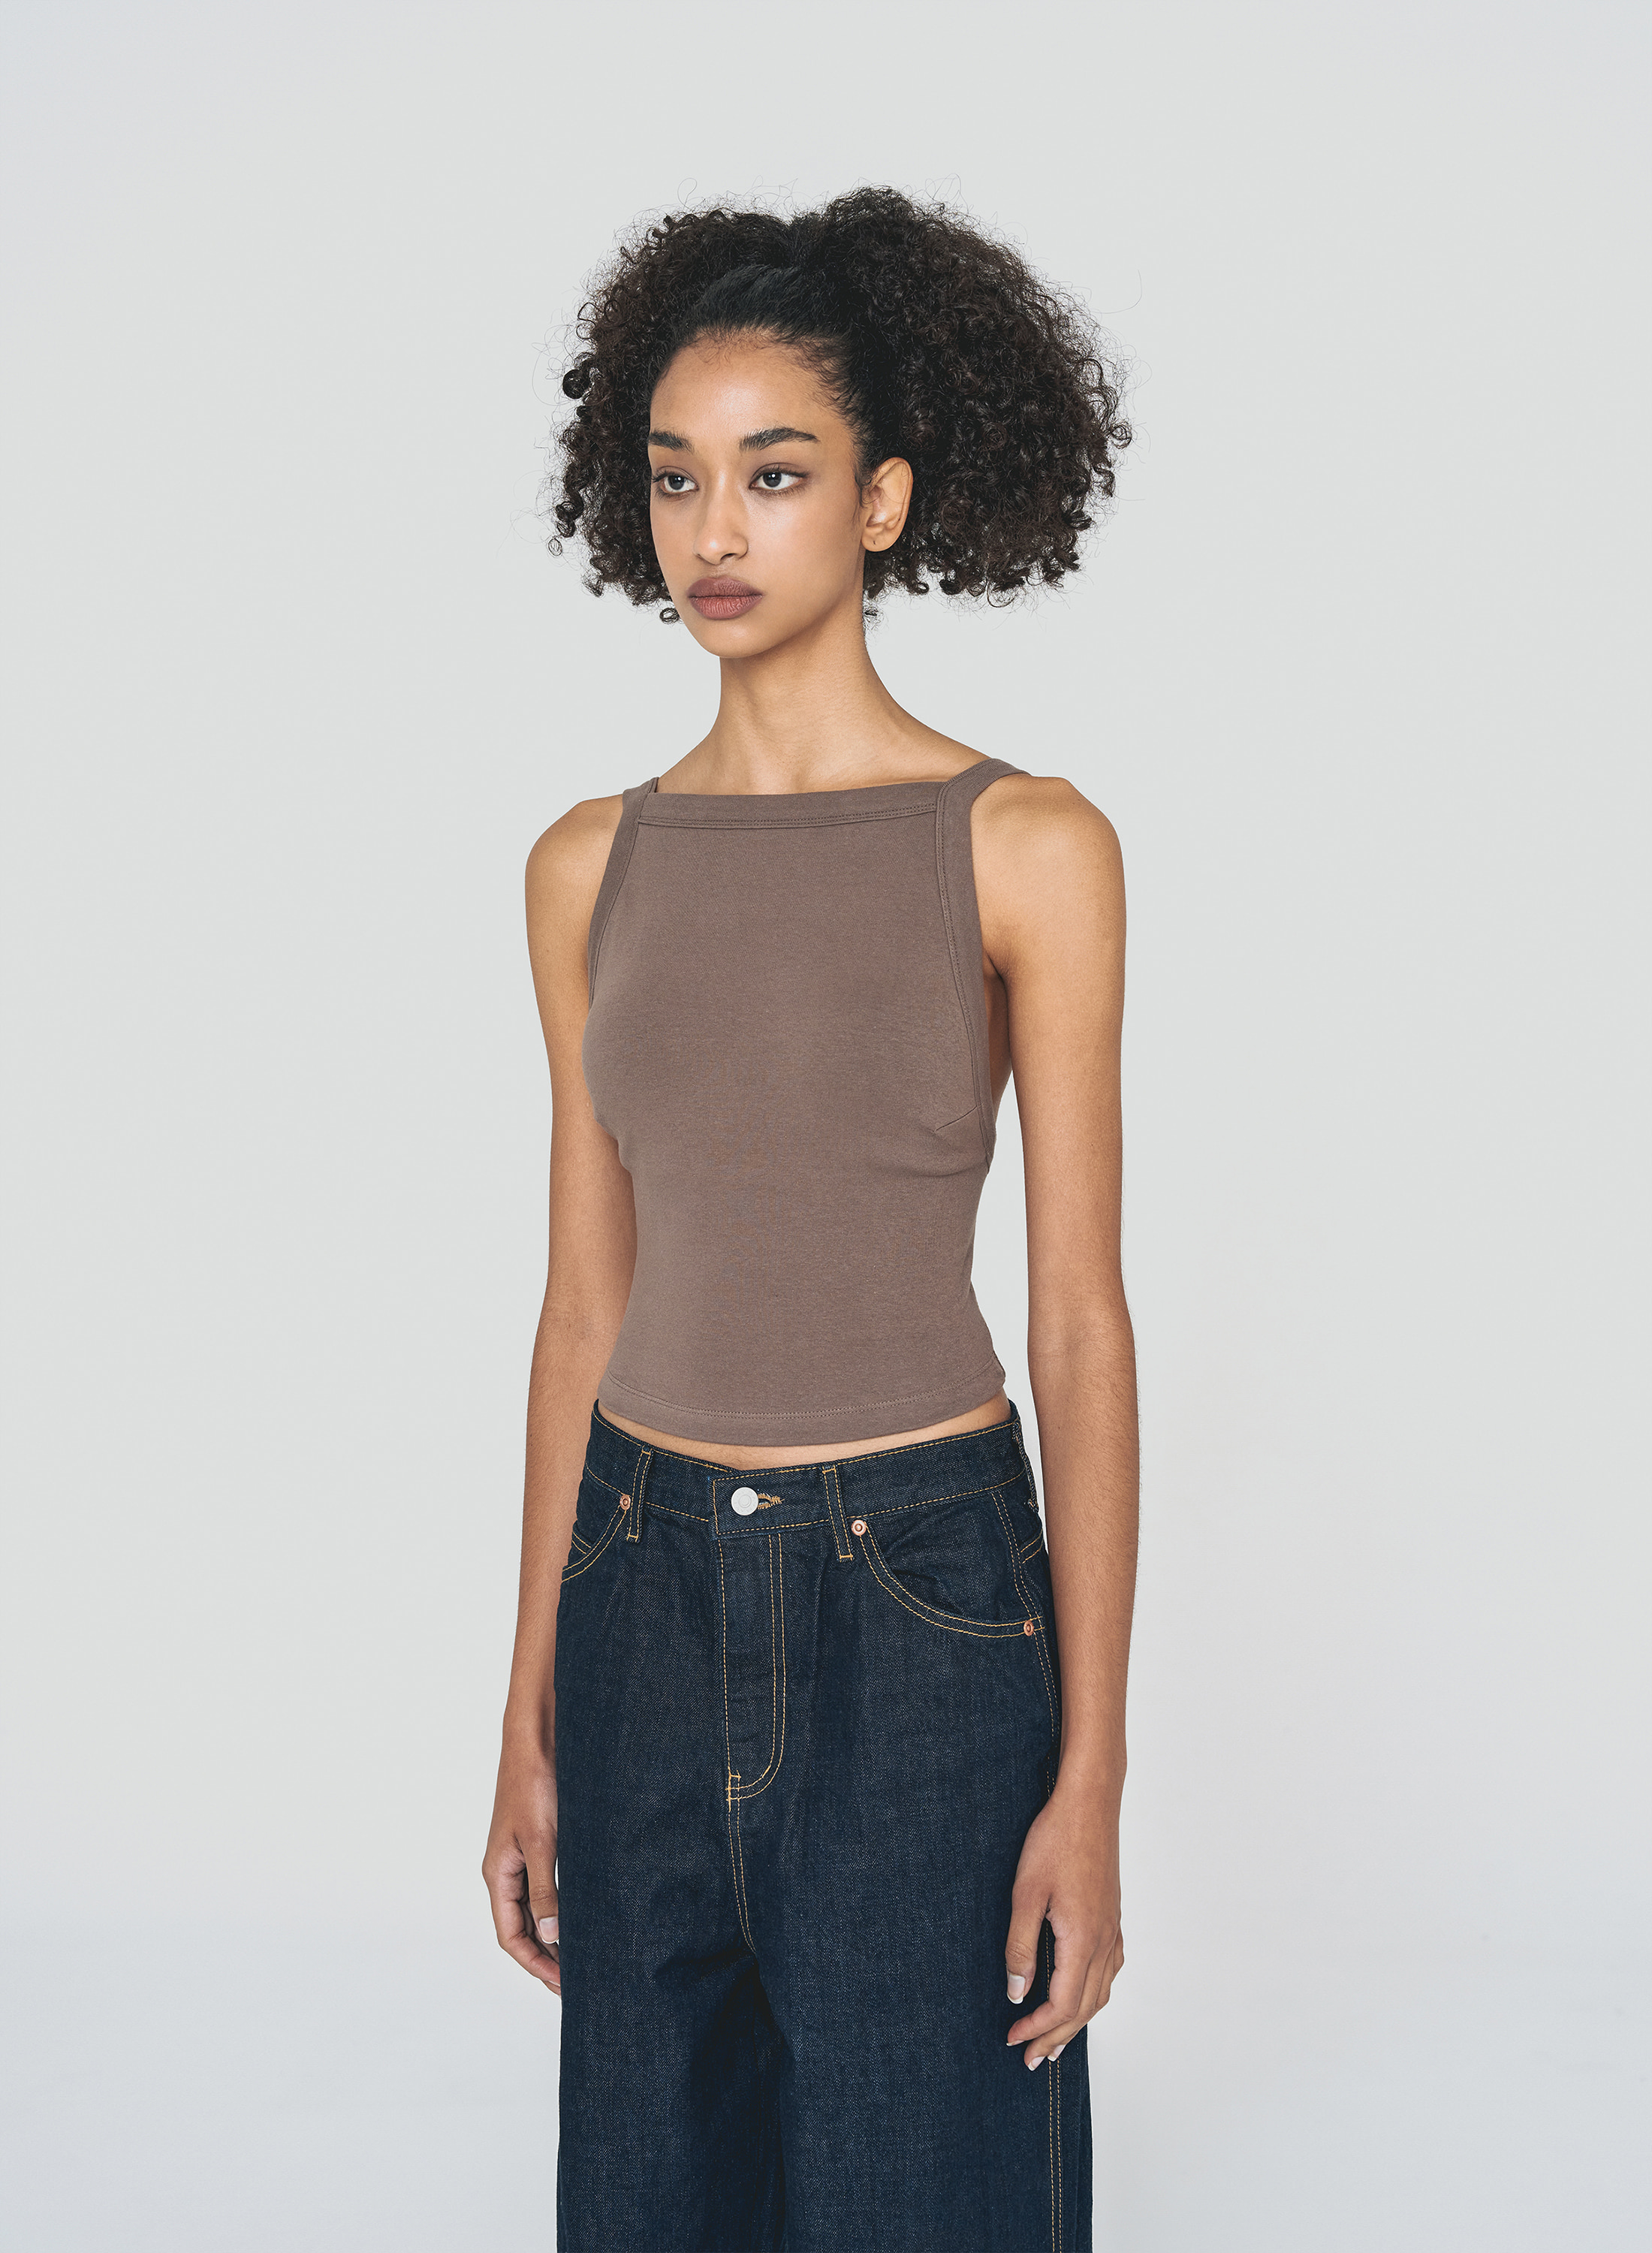 PAD BACKLESS TOP BROWN 바이스어치브유쓰